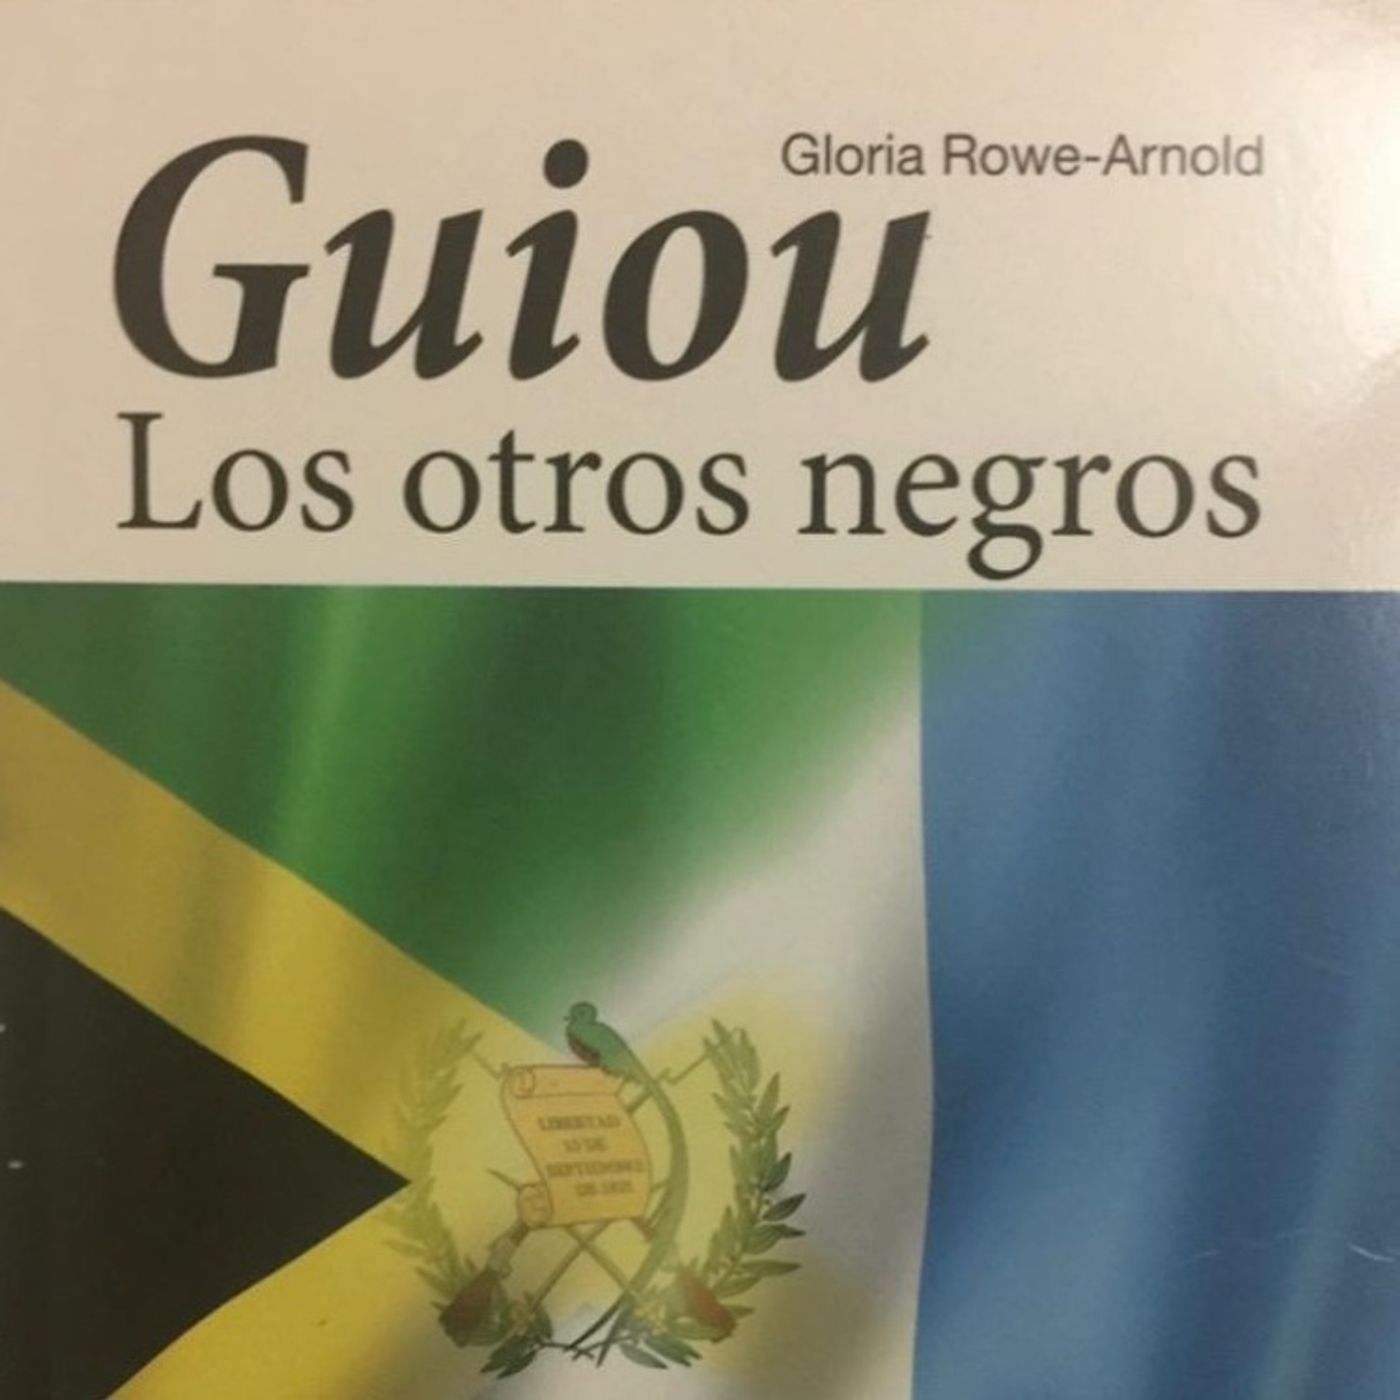 Guiou the Other Blacks: Visibility to the History & Contributions of Jamaicans in Central America